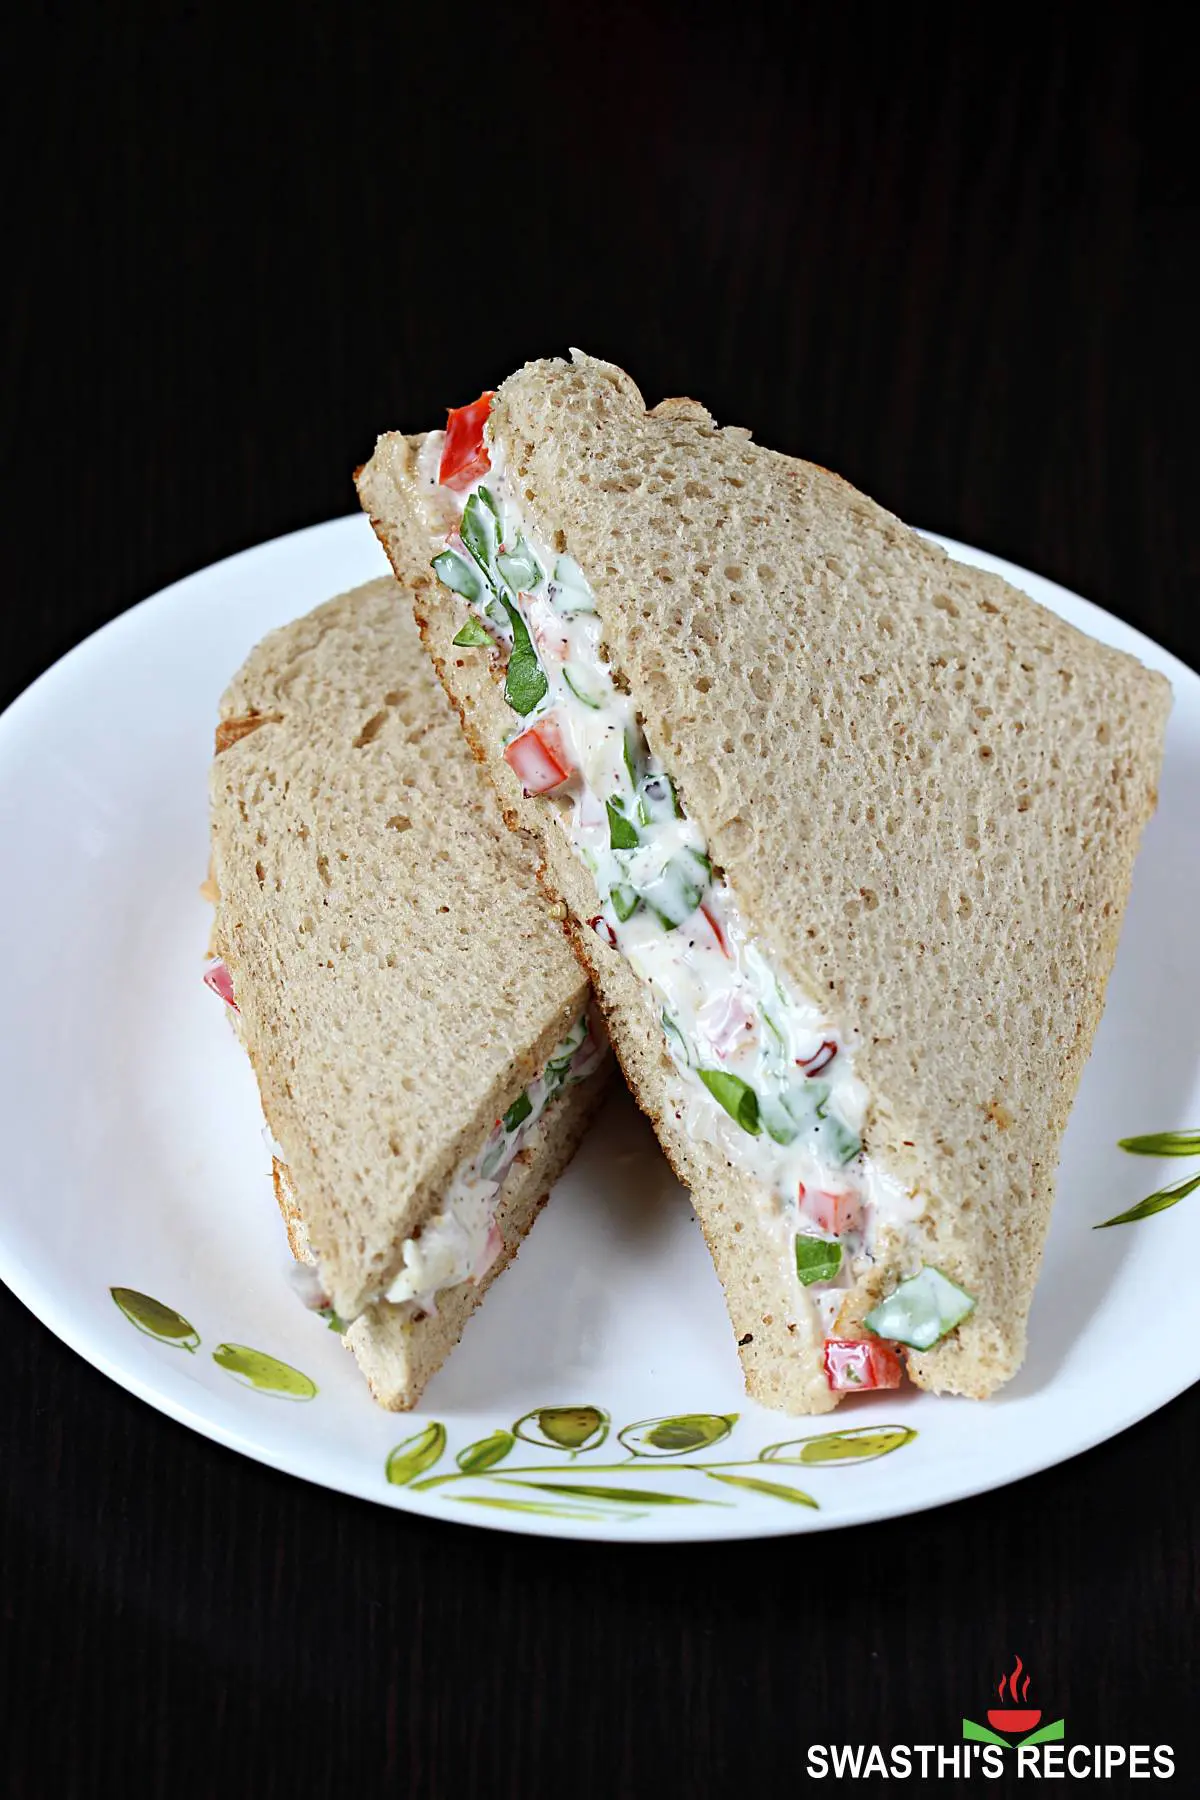 mayo sandwich with vegetables